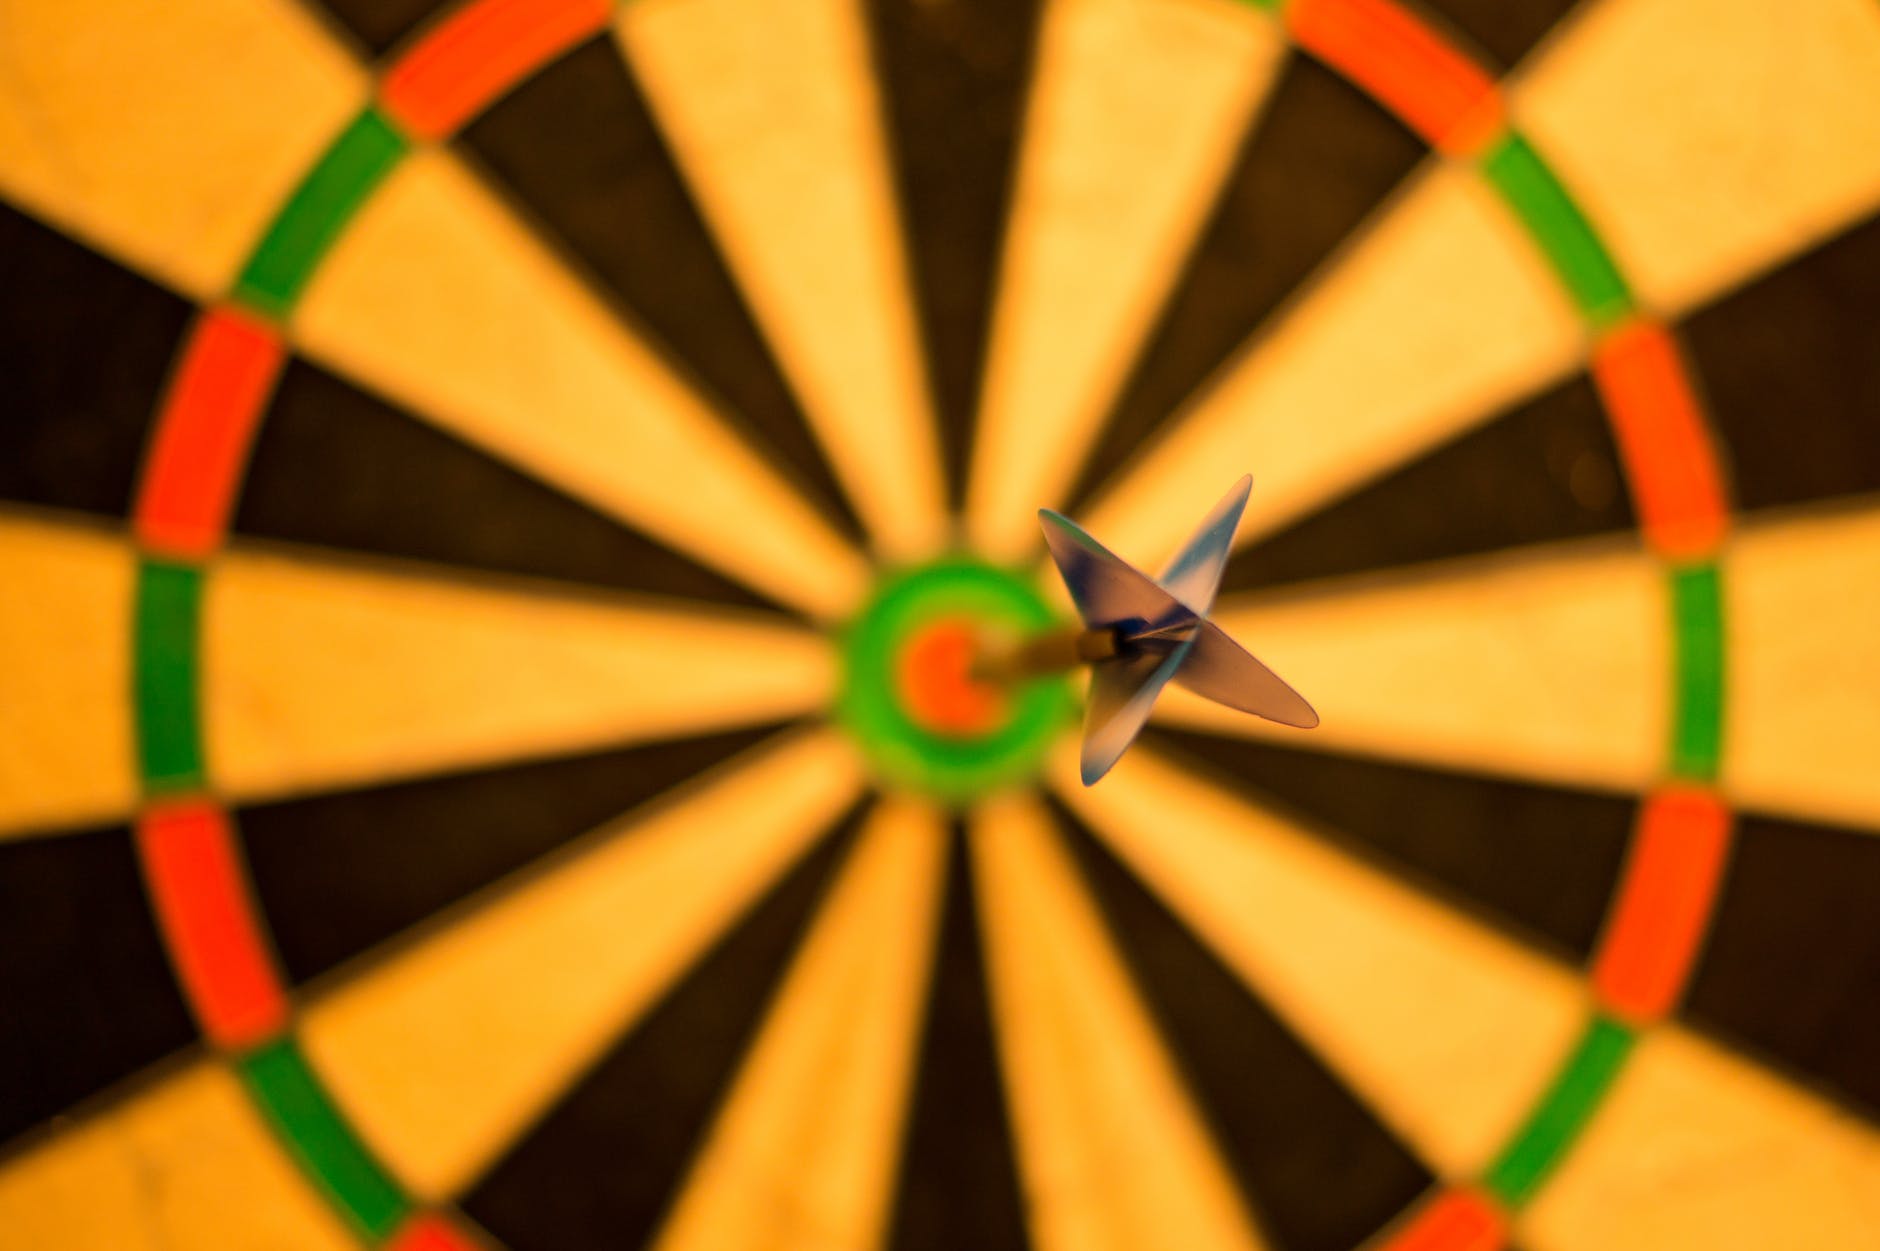 setting goals for yourself requires planning and a desired outcome (much like a game of darts!)